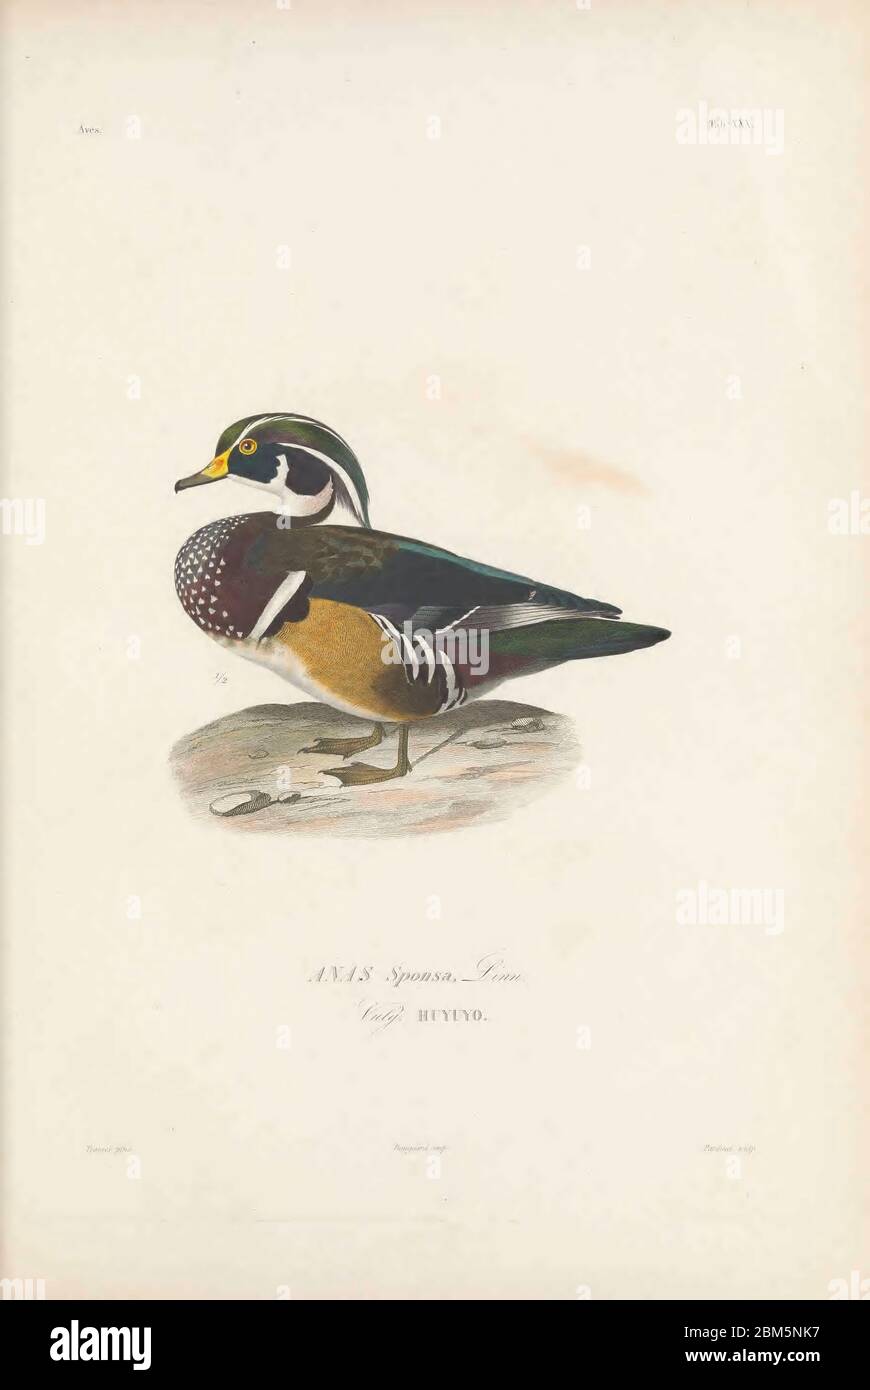 Birds of Cube 1838 wood duck or Carolina duck (Aix sponsa [Here as Anas sponsa]) is a species of perching duck found in North America. It is one of the most colorful North American waterfowl. From the book Histoire physique, politique et naturelle de l'ile de Cuba [Physical, political and natural history of the island of Cuba] by  Sagra, Ramón de la, 1798-1871; Orbigny, Alcide Dessalines d', 1802-1857 Publication date 1838 Publisher Paris : A. Bertrand Stock Photo